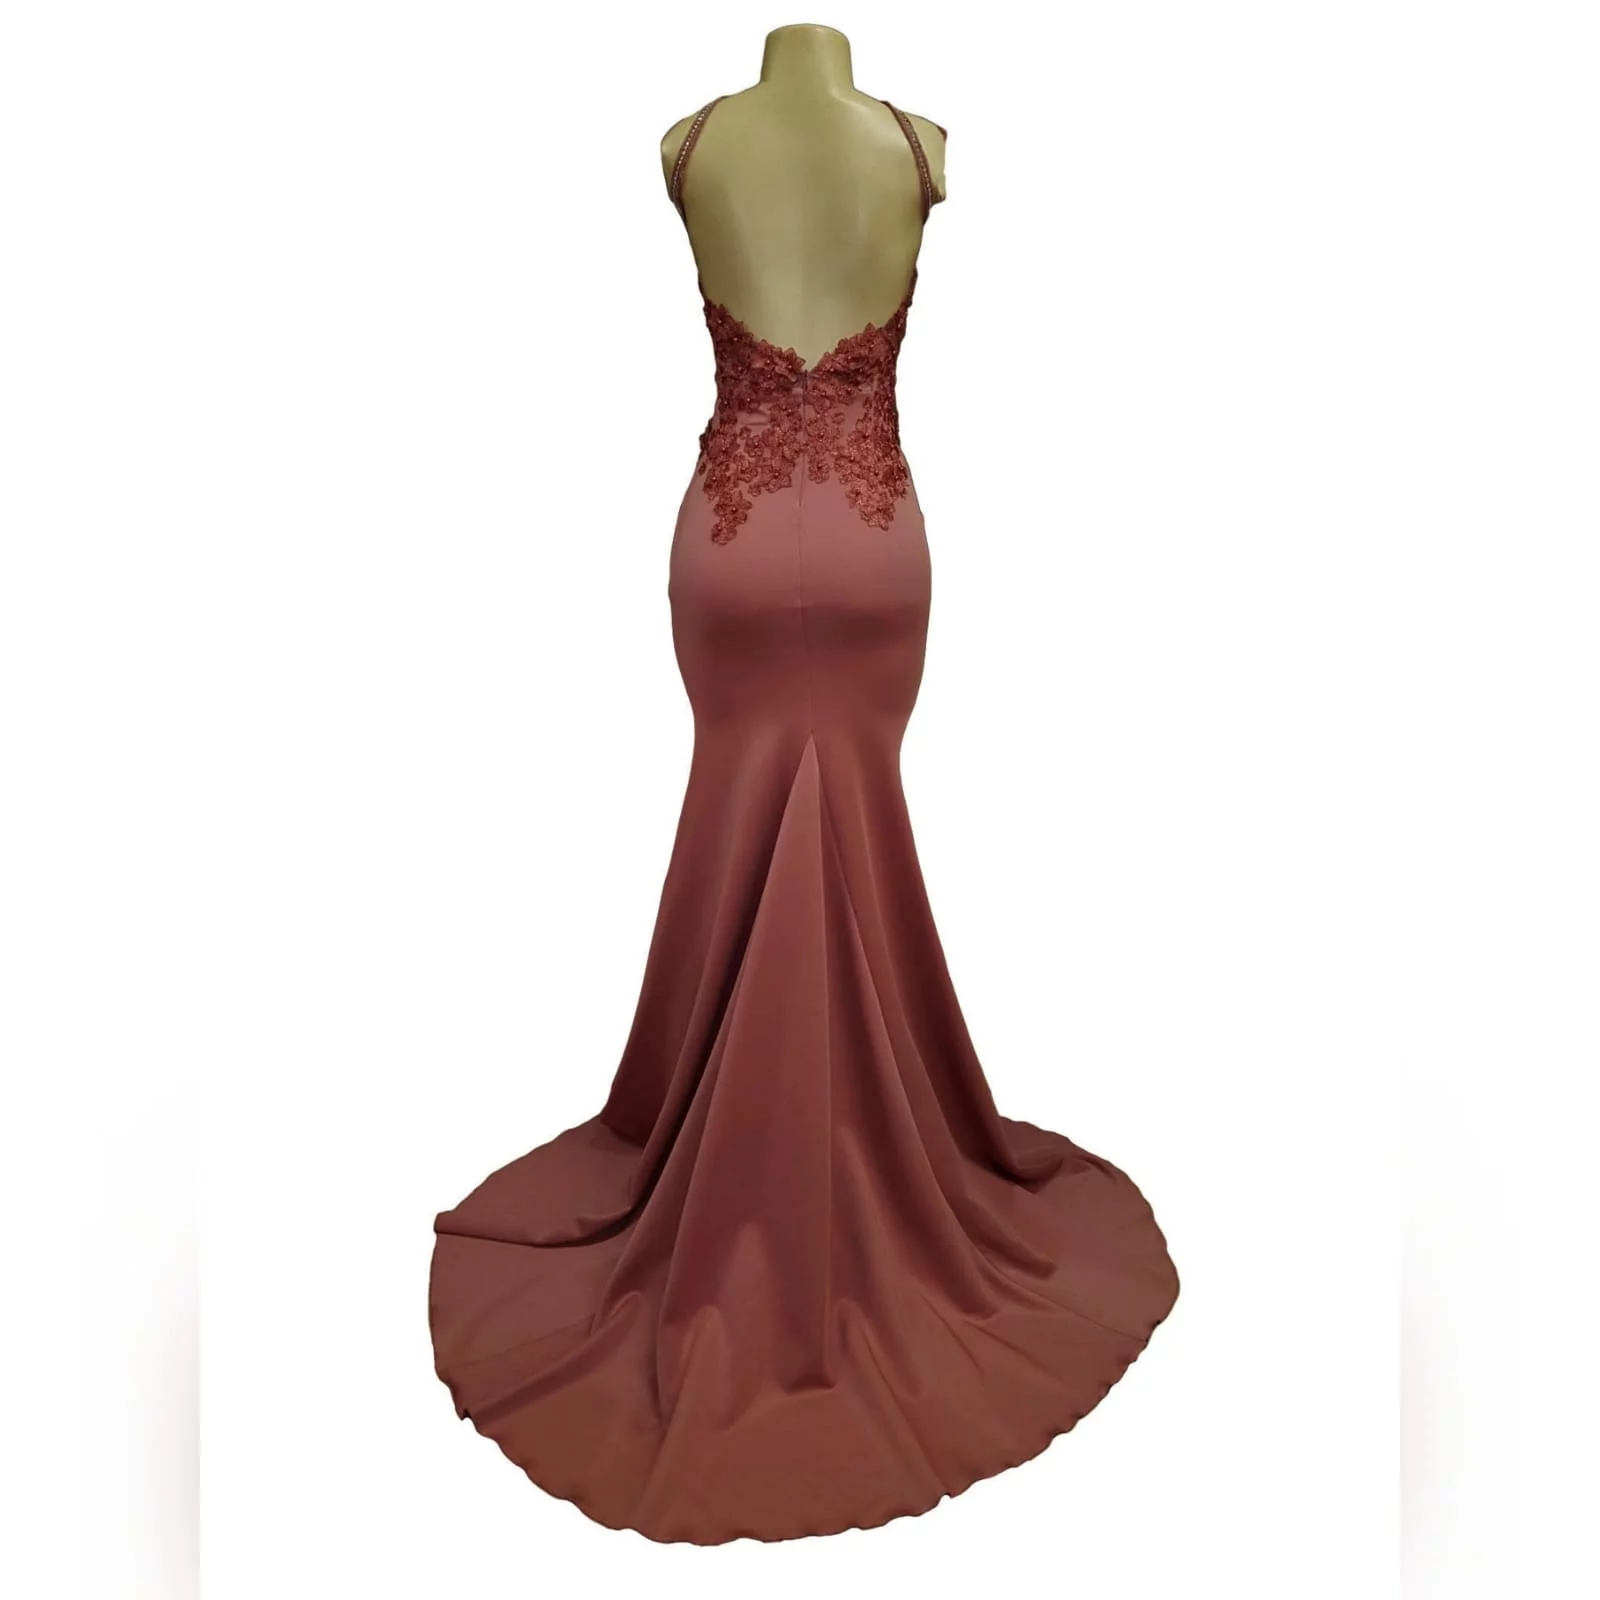 Pink elegant matric dance dress 2 choose a pink elegant matric dance dress for your special event. A colour that inspires kindness, sensitivity and warmth. This colour on this 3d shine lace long sexy dress creates a feel good mood, and that all will be amazing for your special night.